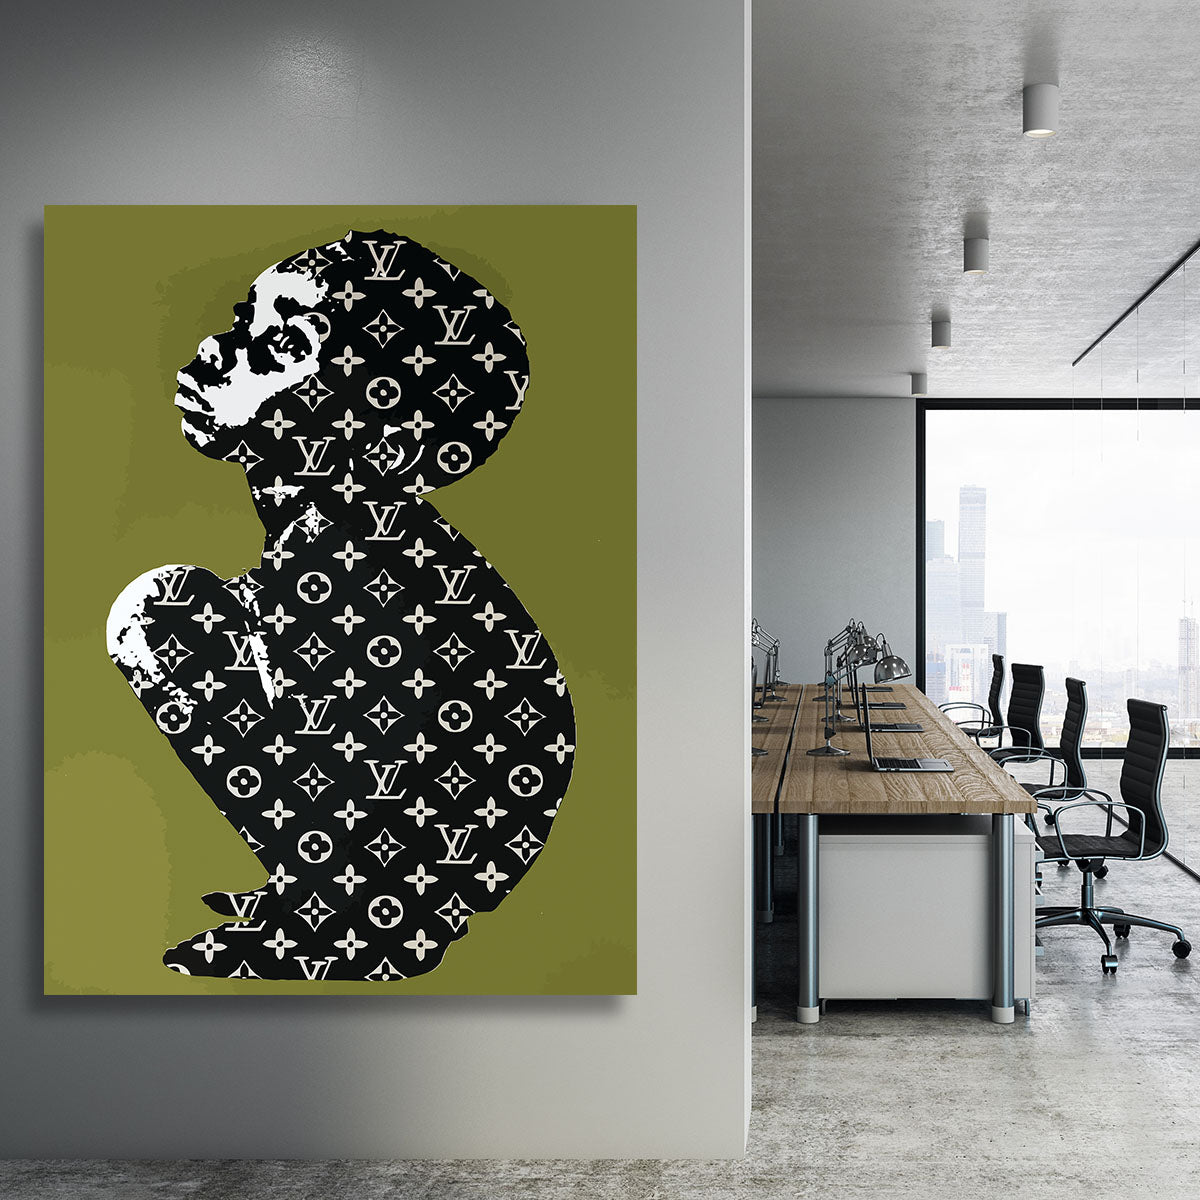 worldwide limitation 100 sheets DEATH NYC Bank si-Banksy[ manner boat .  young lady ] Louis Vuitton LOUISVUITTON LV pop art art poster present-day  art KAWS: Real Yahoo auction salling